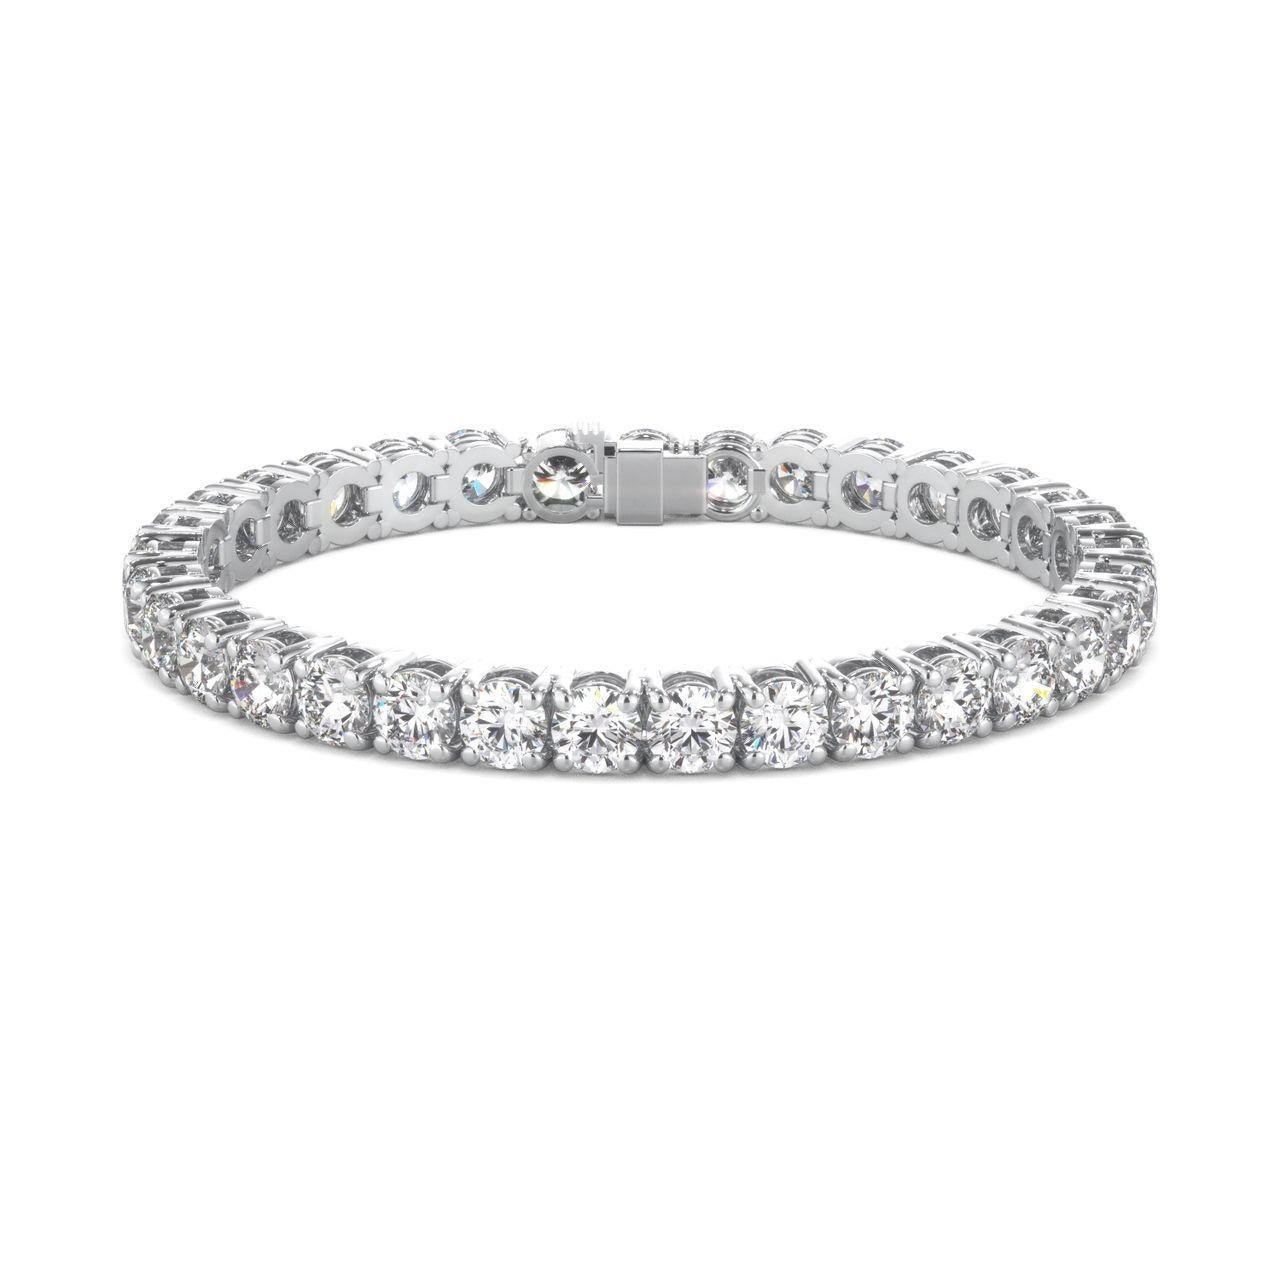 Indulge in the timeless allure of our 7' tennis bracelet, meticulously crafted in lustrous platinum. Featuring 31 dazzling round diamonds, each securely held in a classic 4-prong basket setting, this bracelet radiates elegance and sophistication.